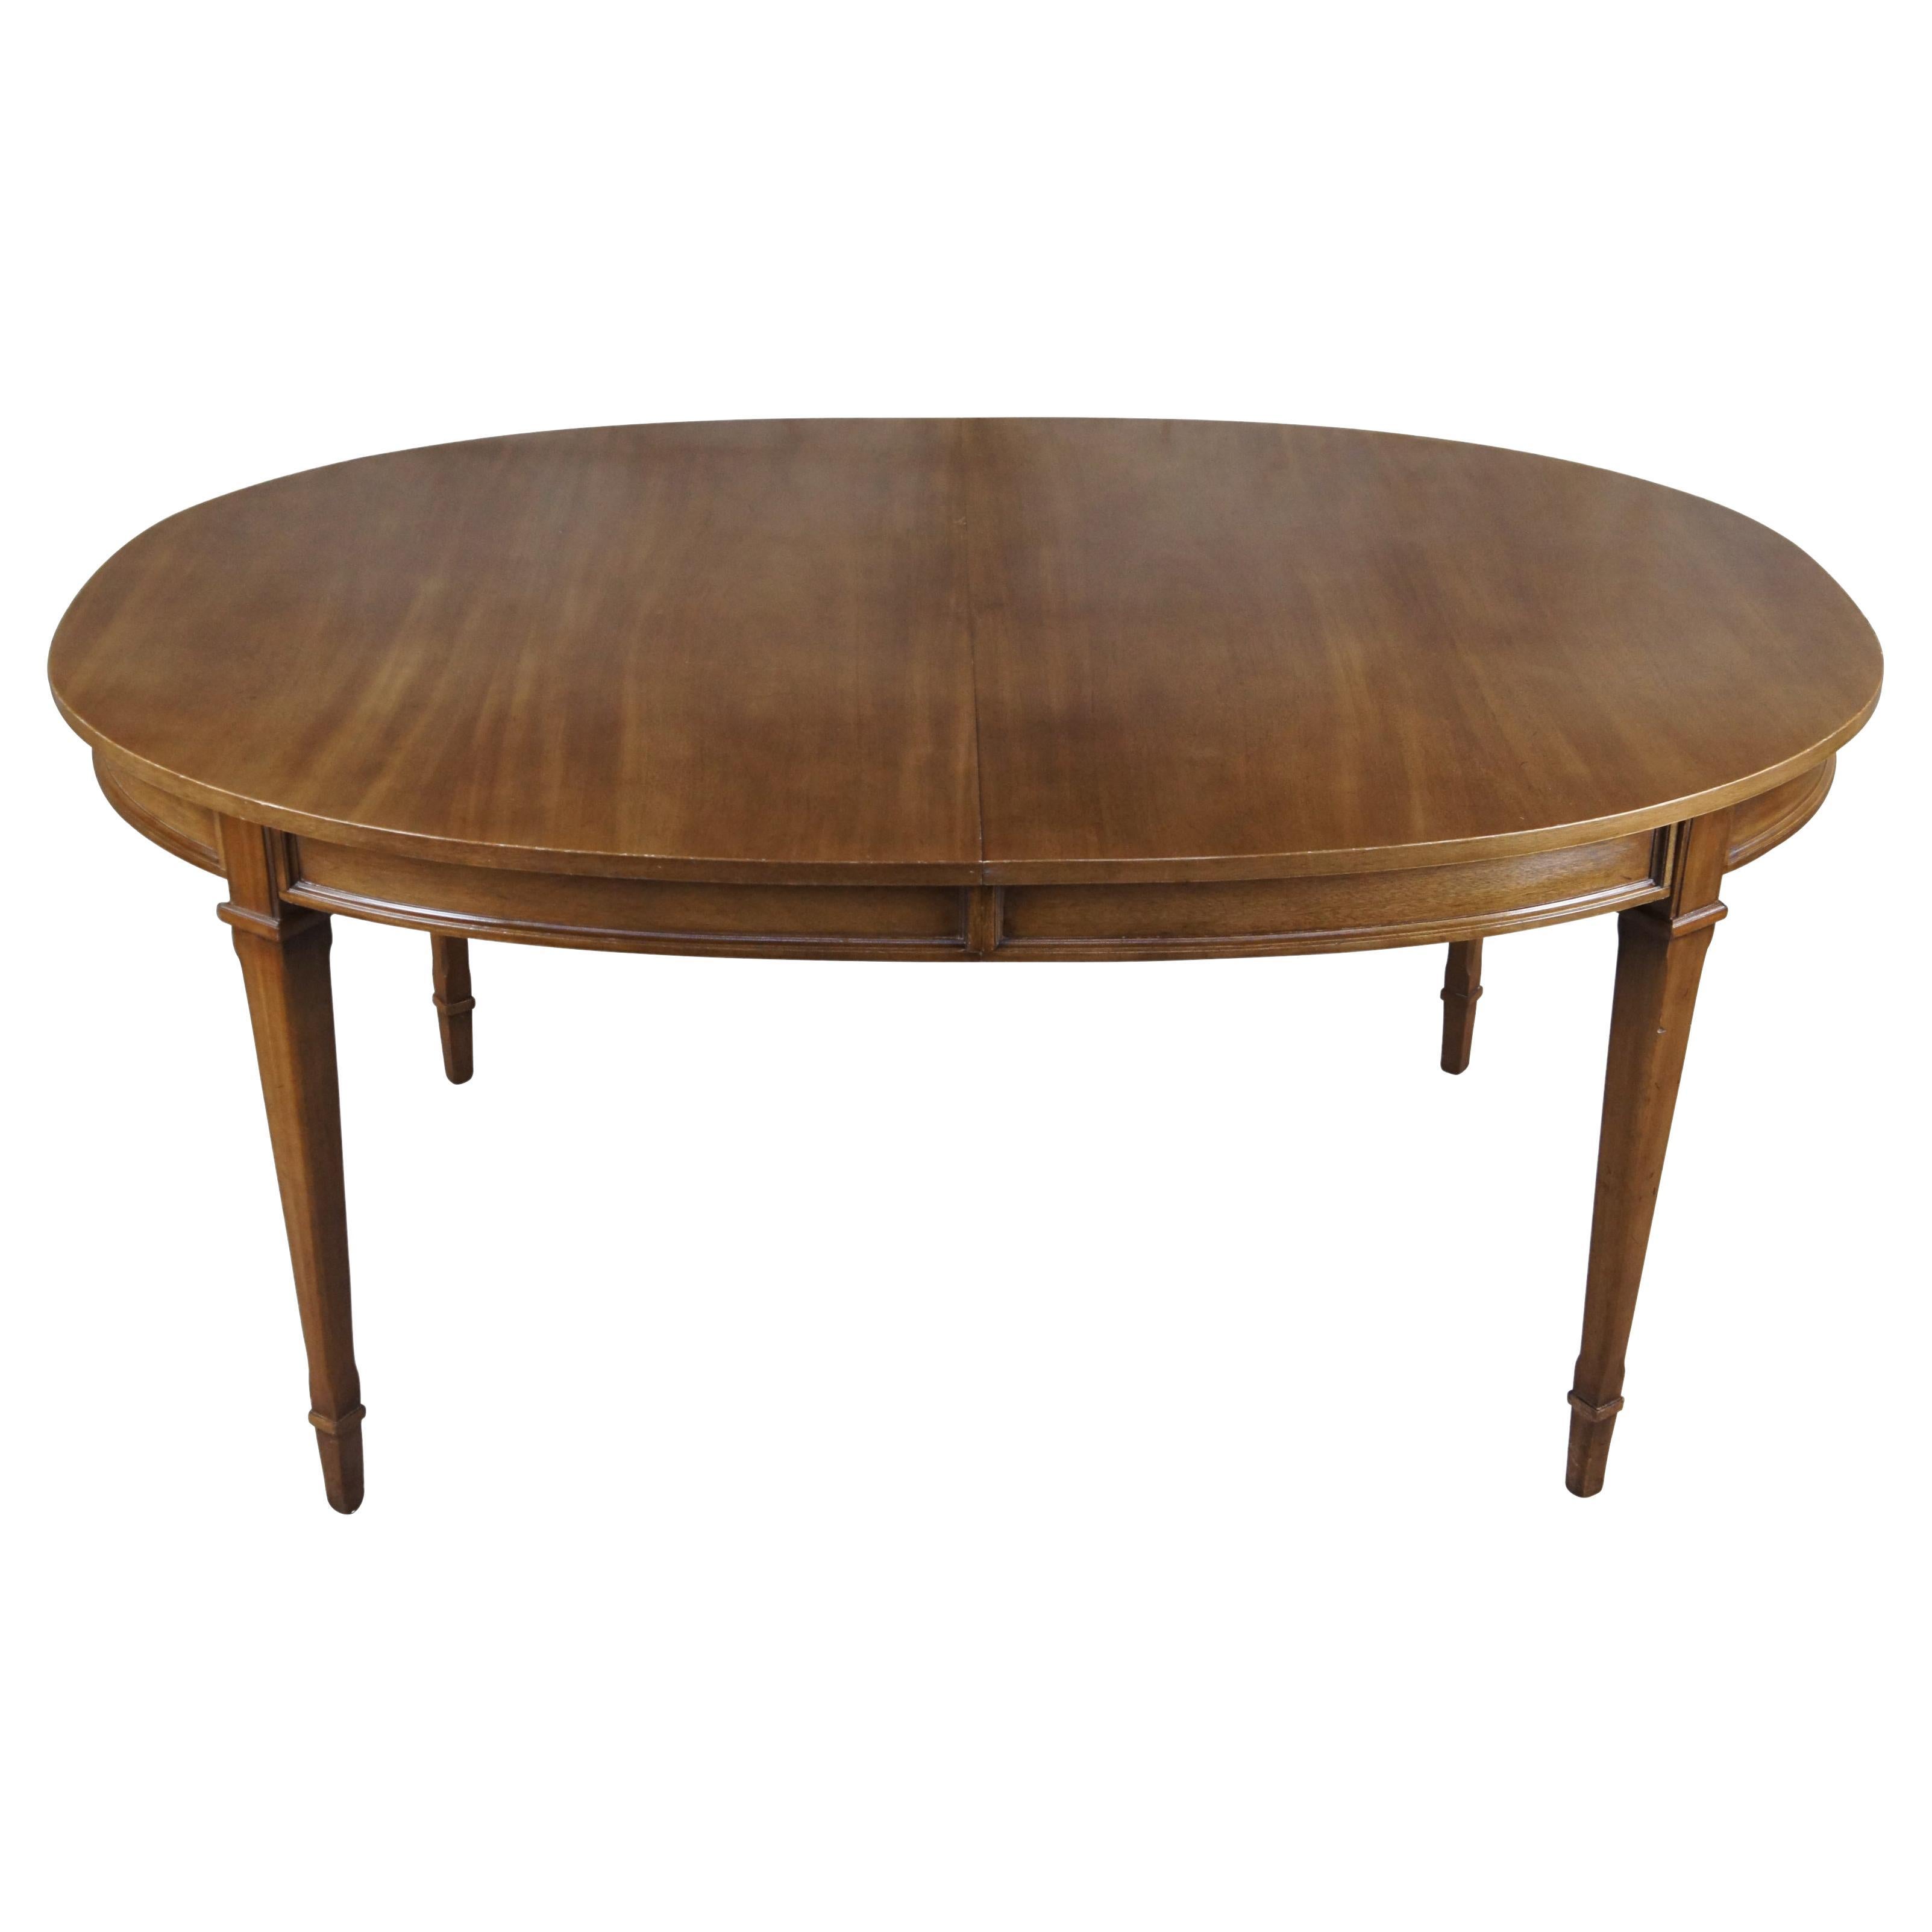 Mid-Century Modern Drexel Triune Mahogany Oval Extendable Dining Table